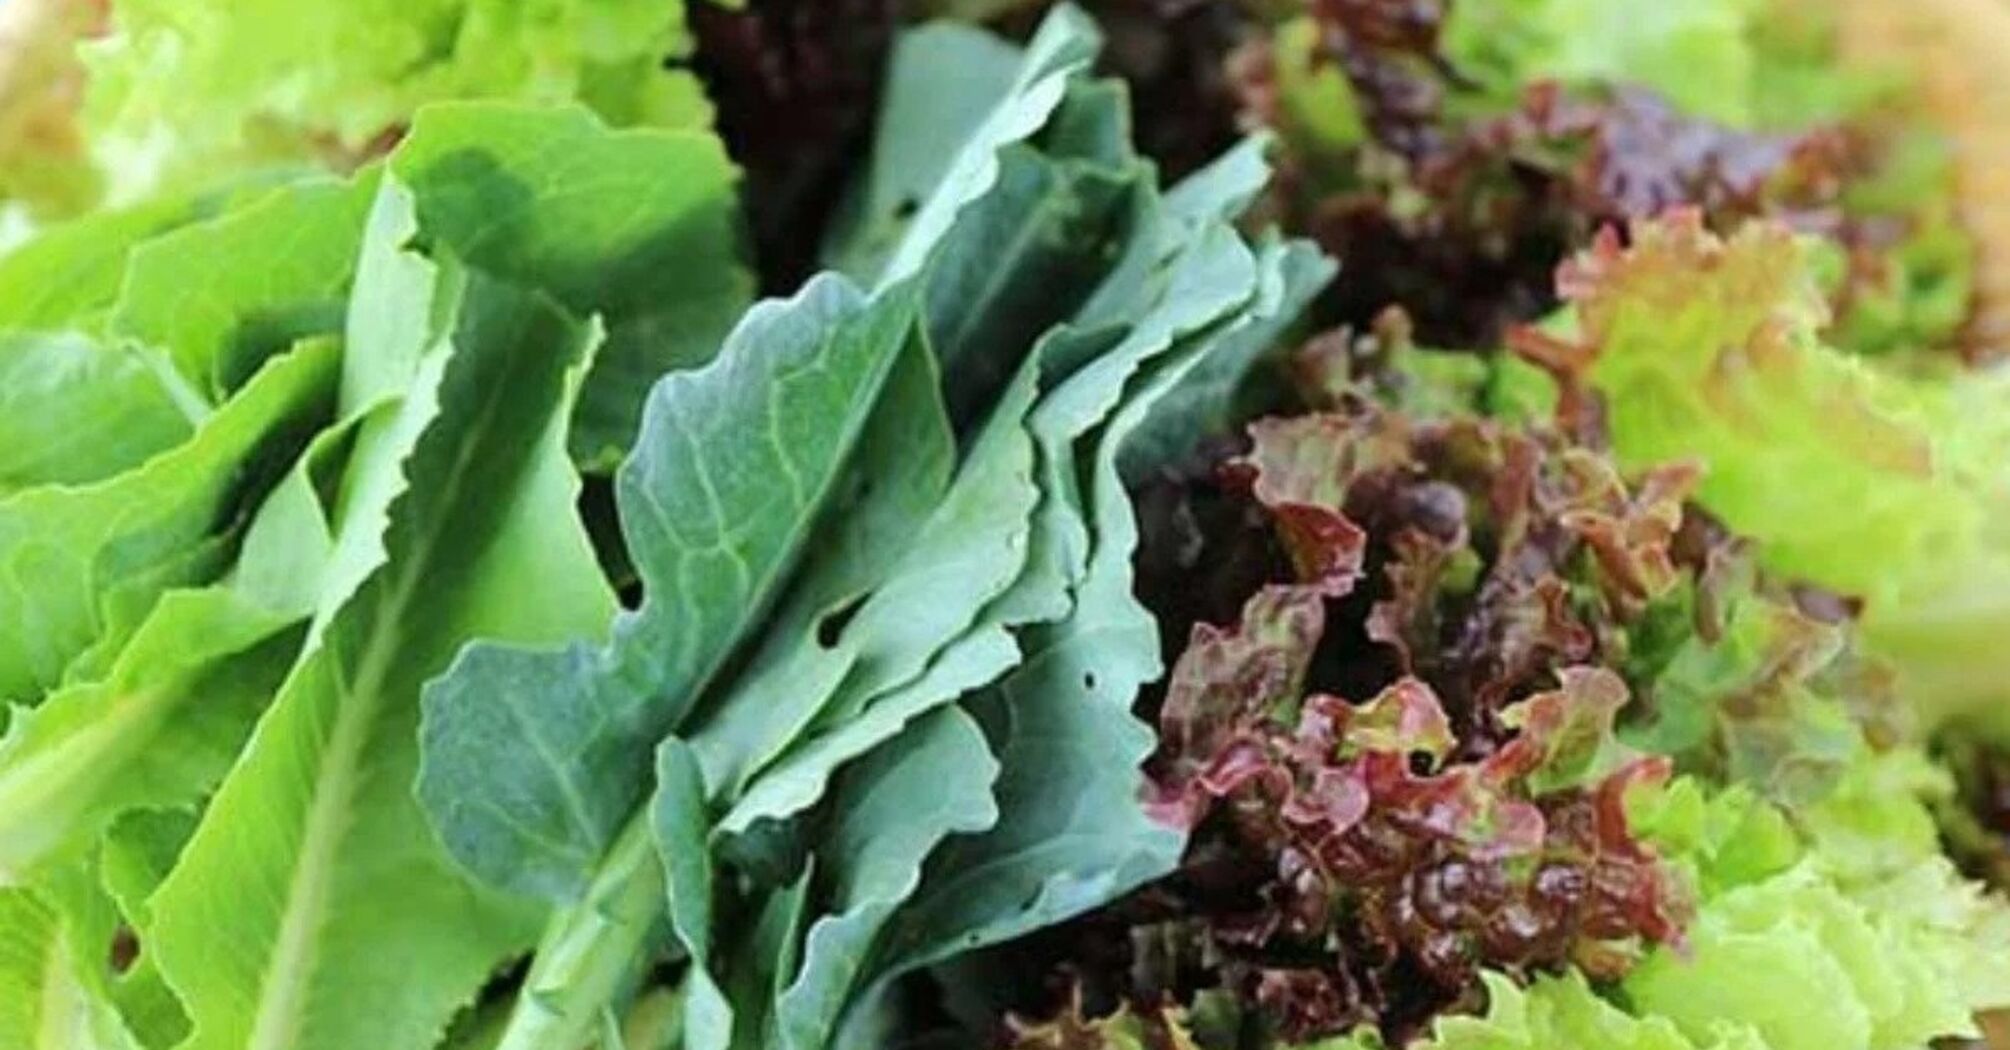 How to freeze greens without compromising their appearance